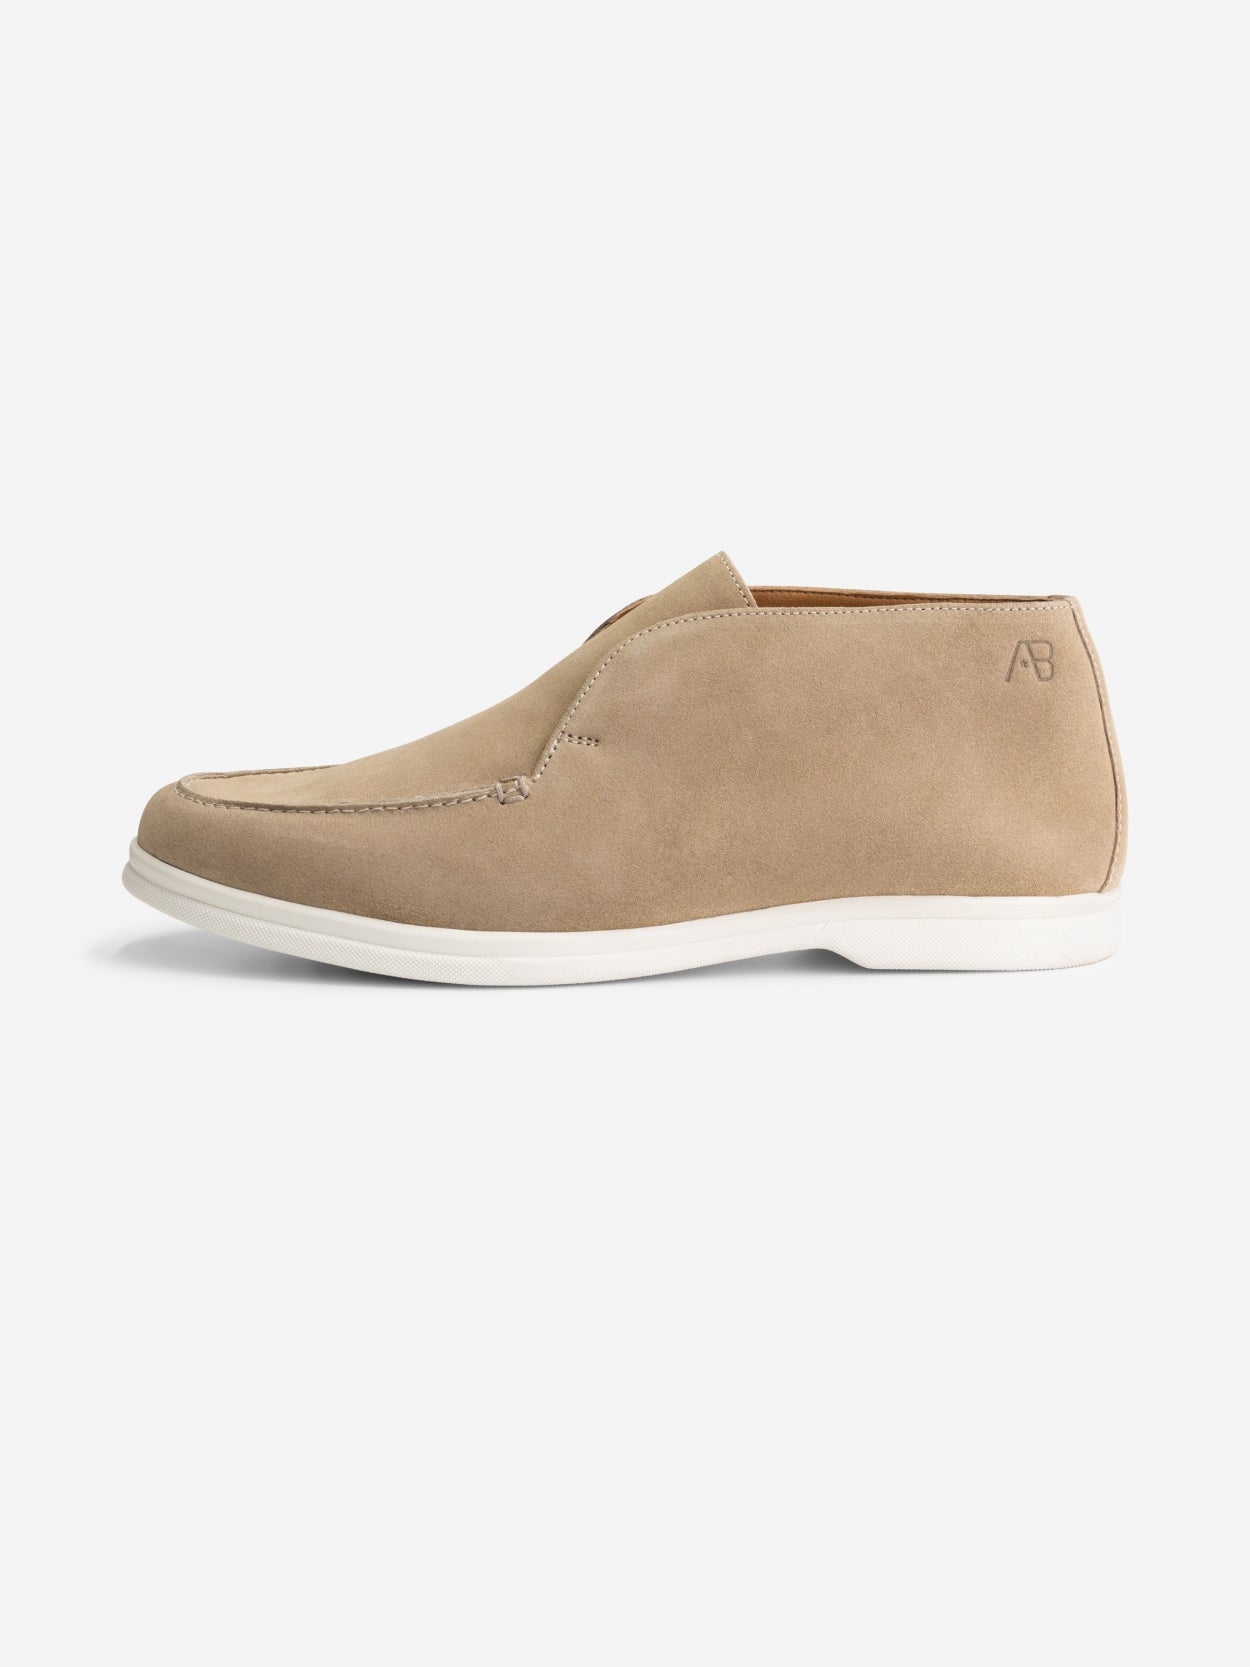 AB Lifestyle High Loafer Beige